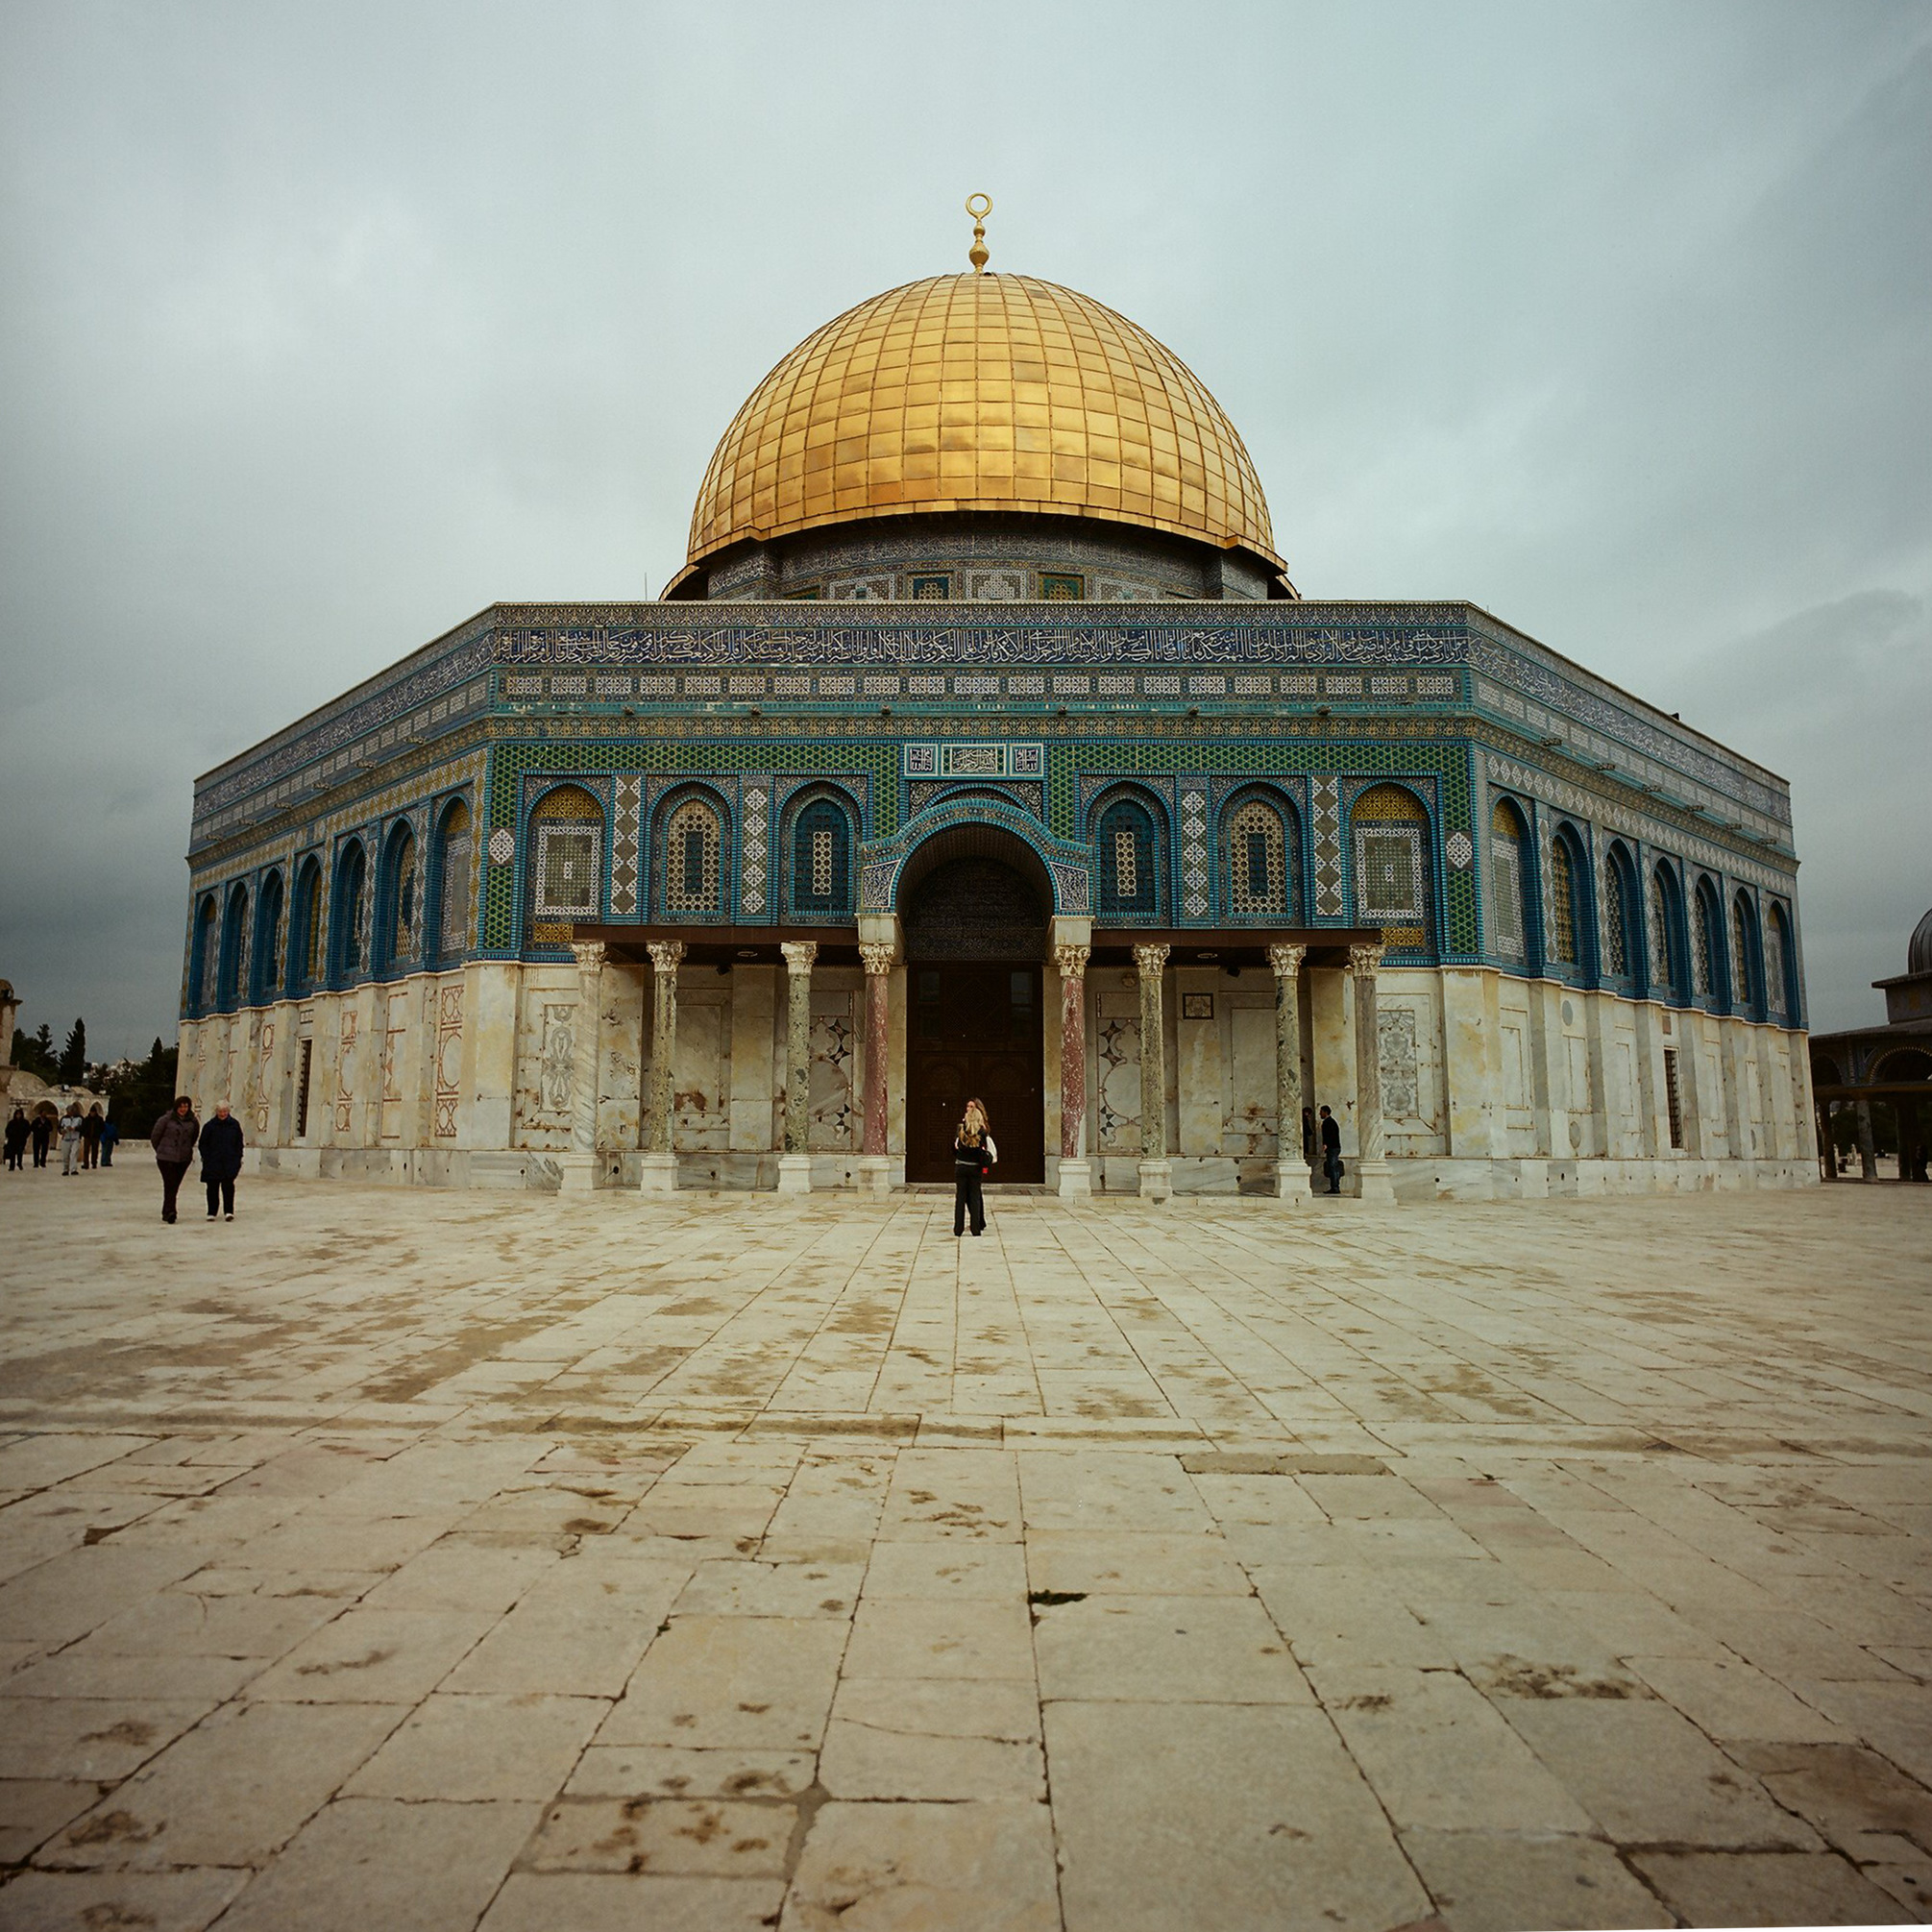 Dome of the Rock on Temple Mount, Jerusalem, Israel.